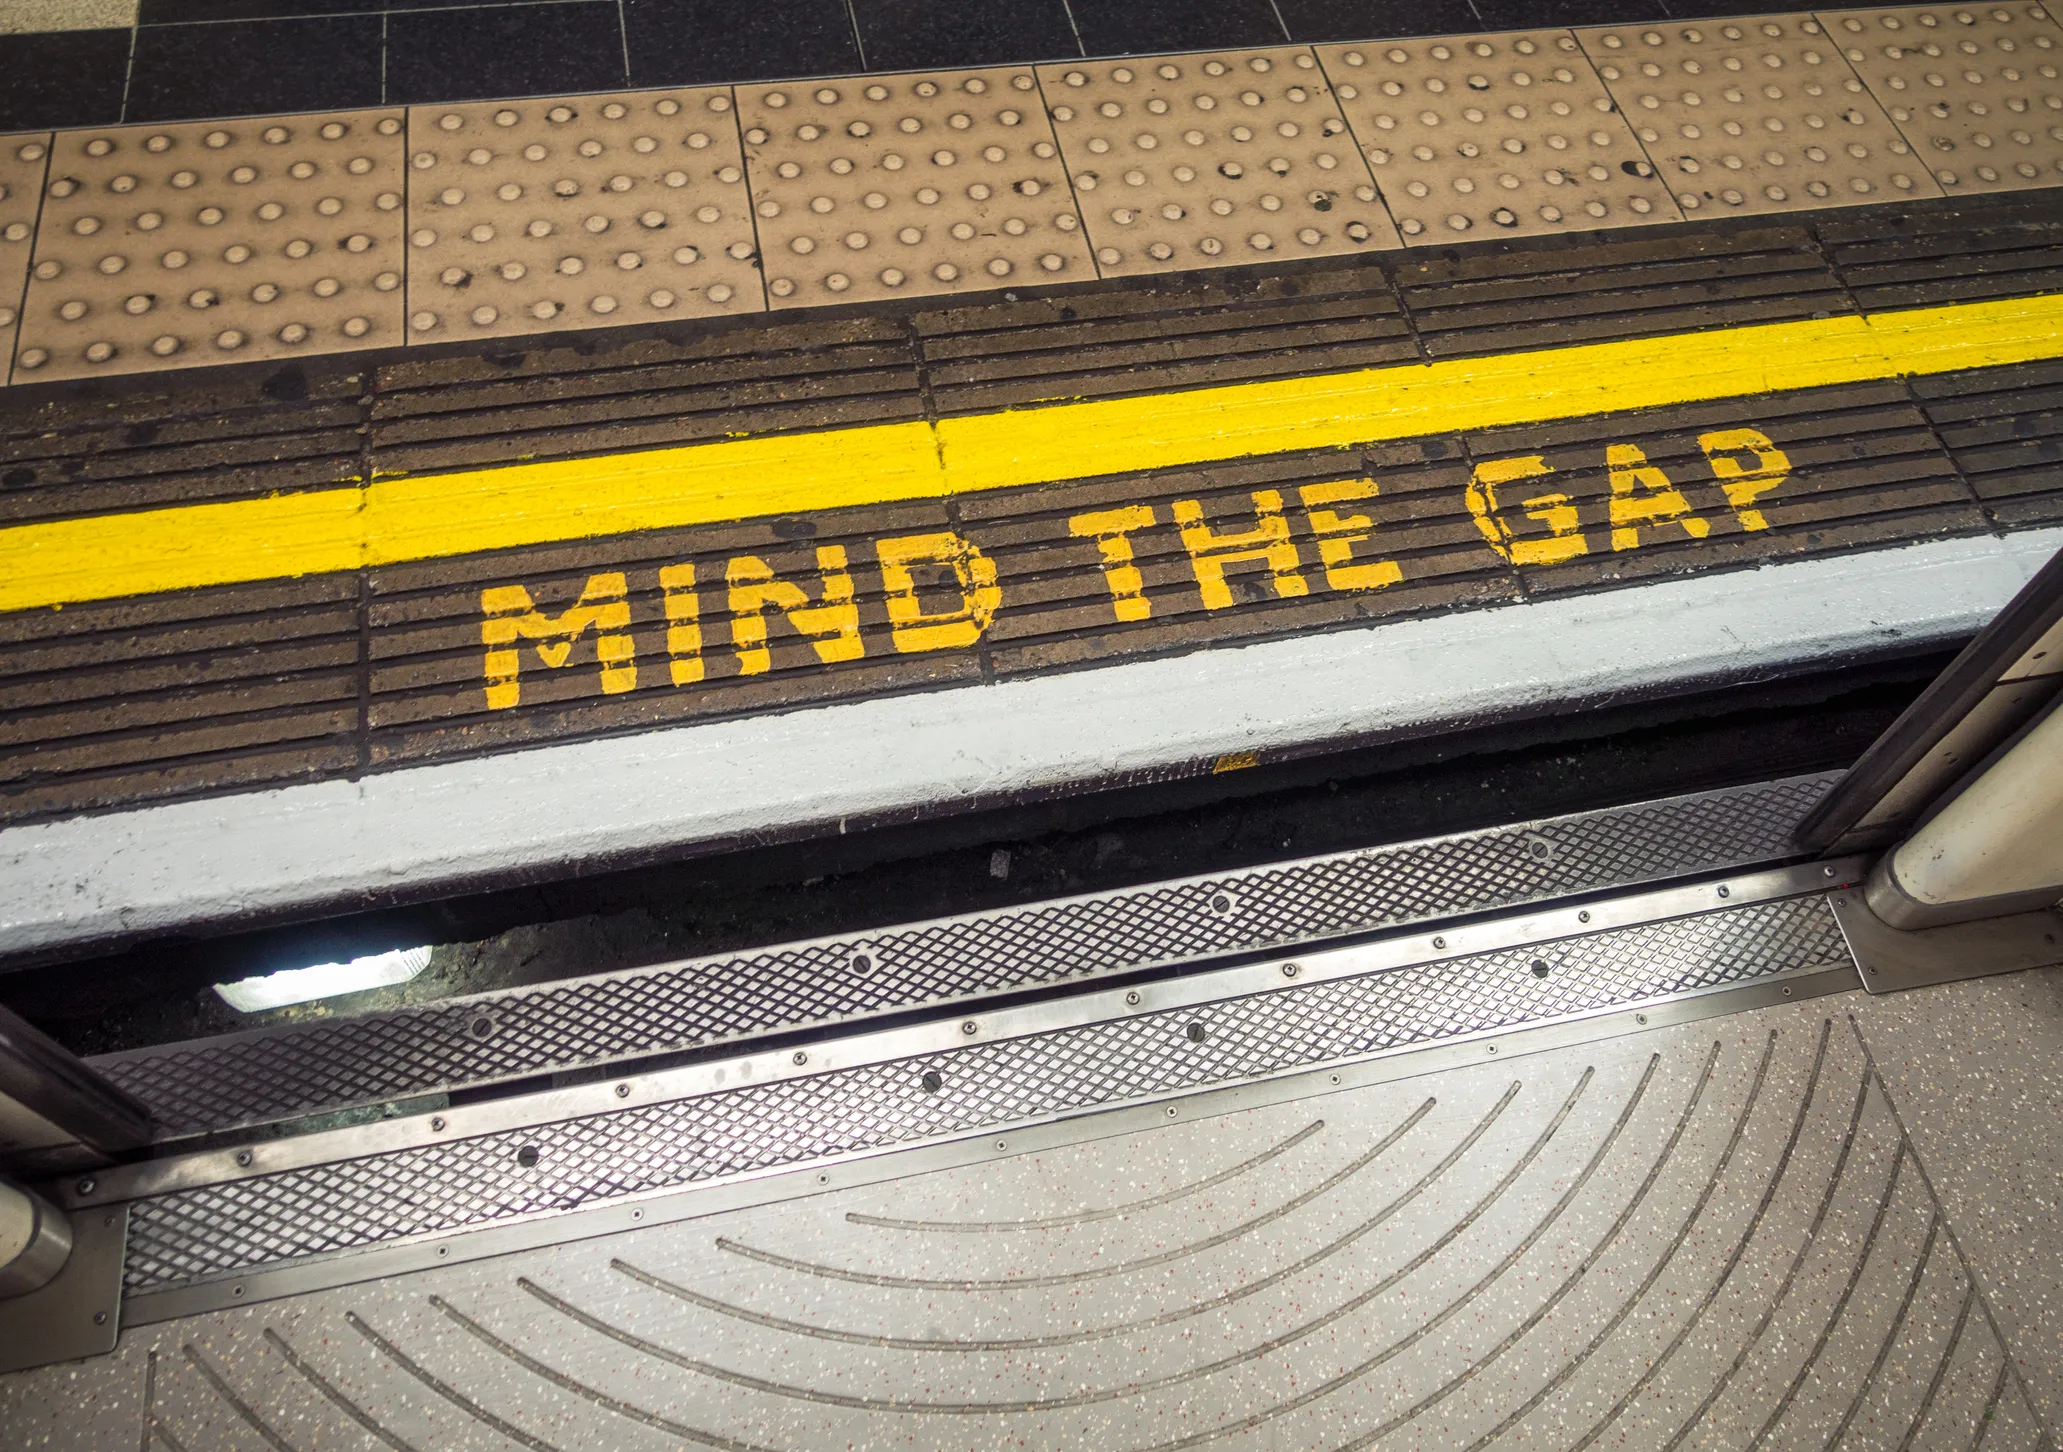 A 'Mind The Gap' warning, painted on the platform of a London Underground station.